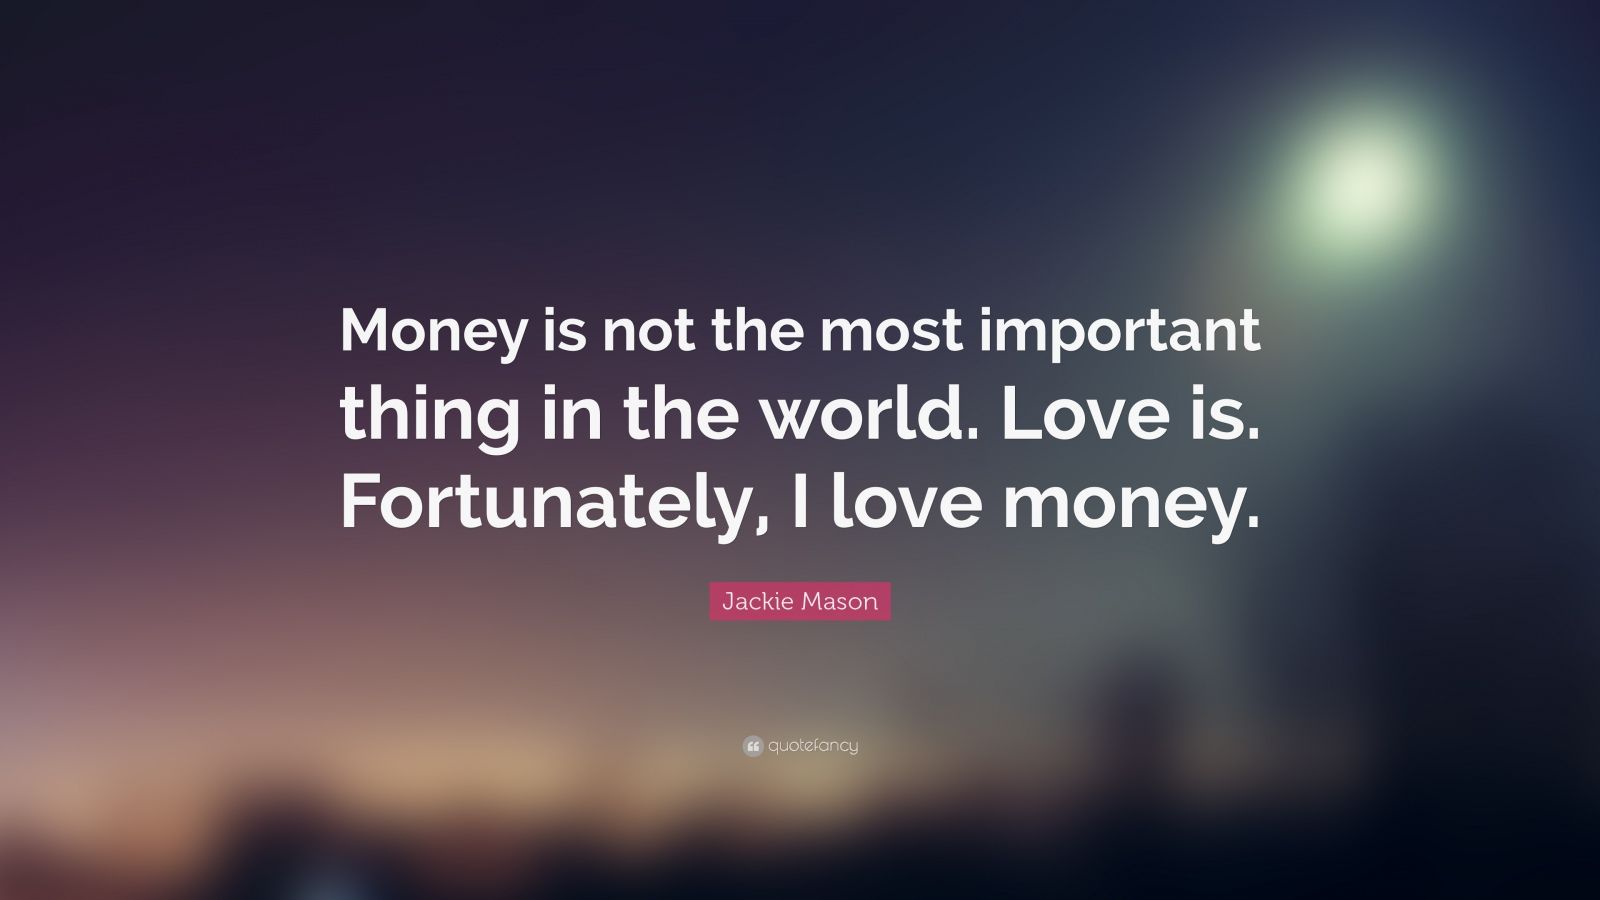 is money important than love